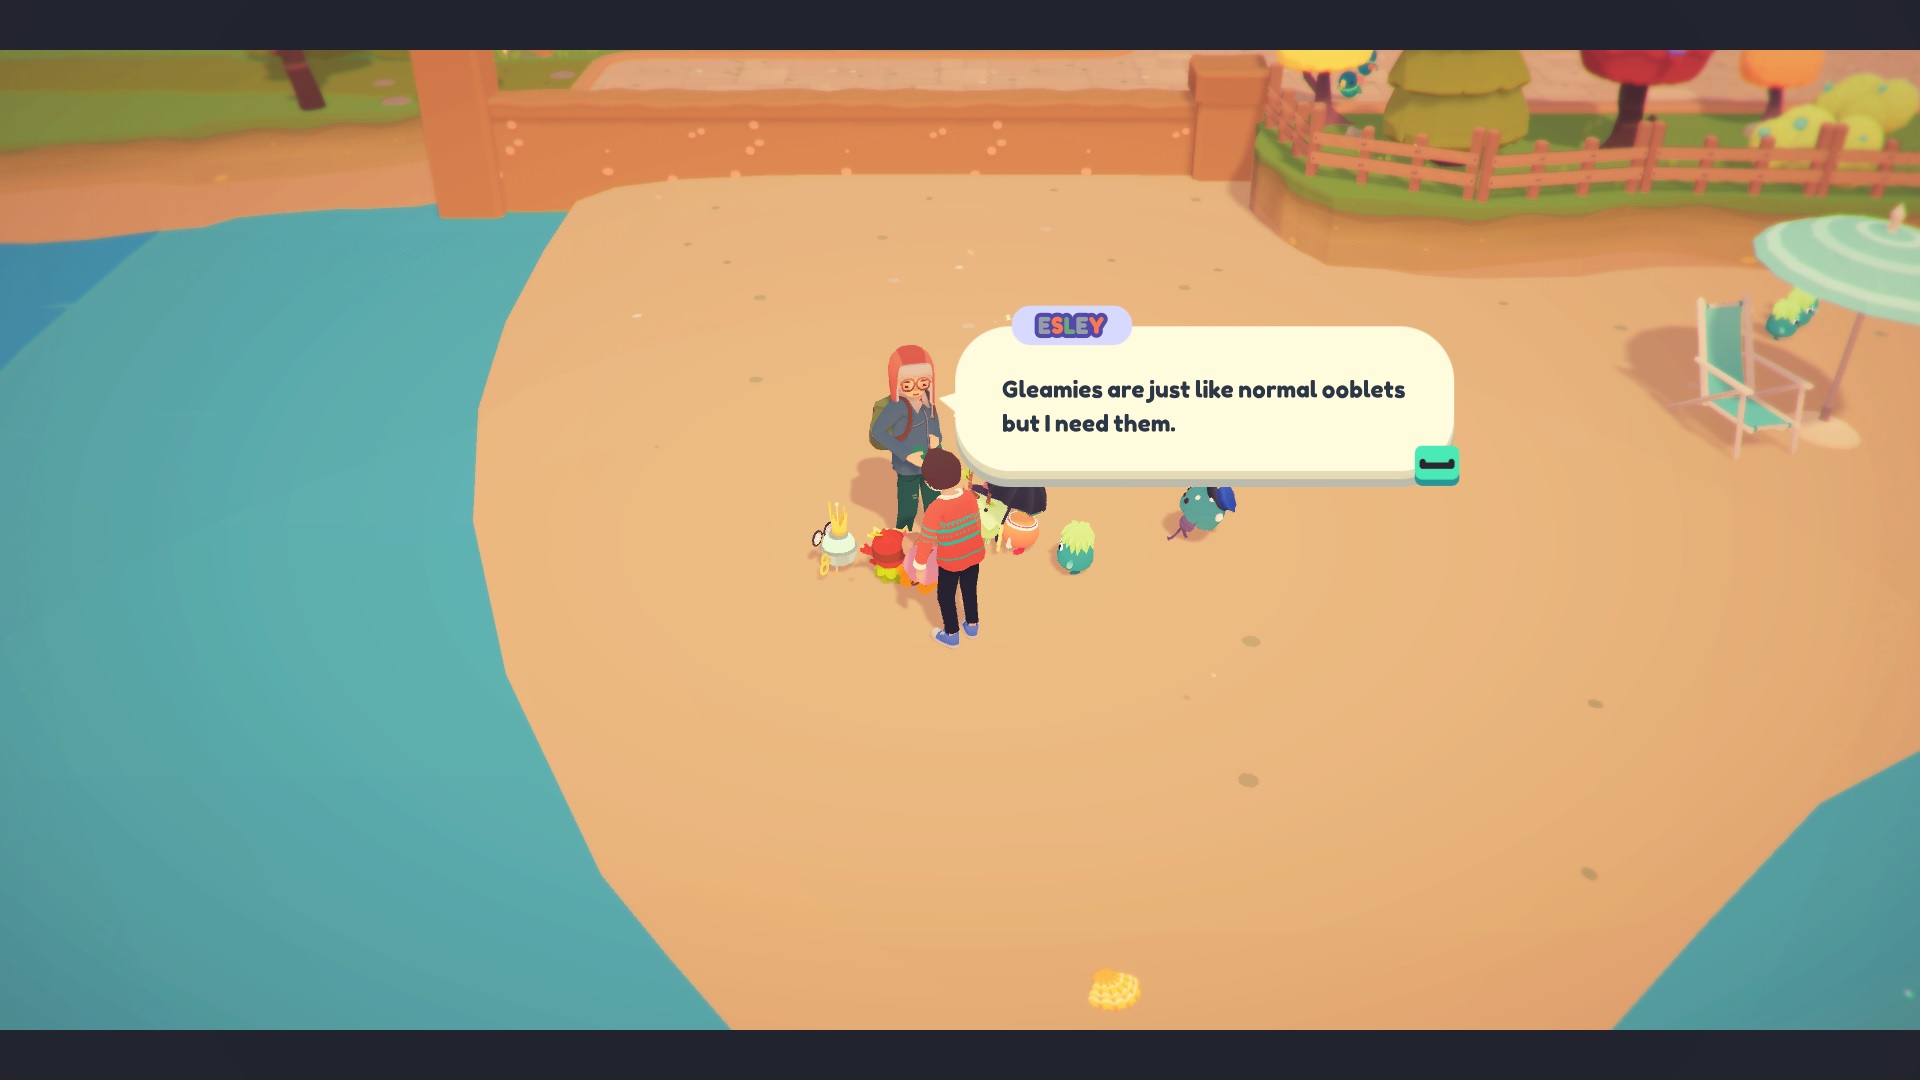 A villager talking about gleamies in Ooblets